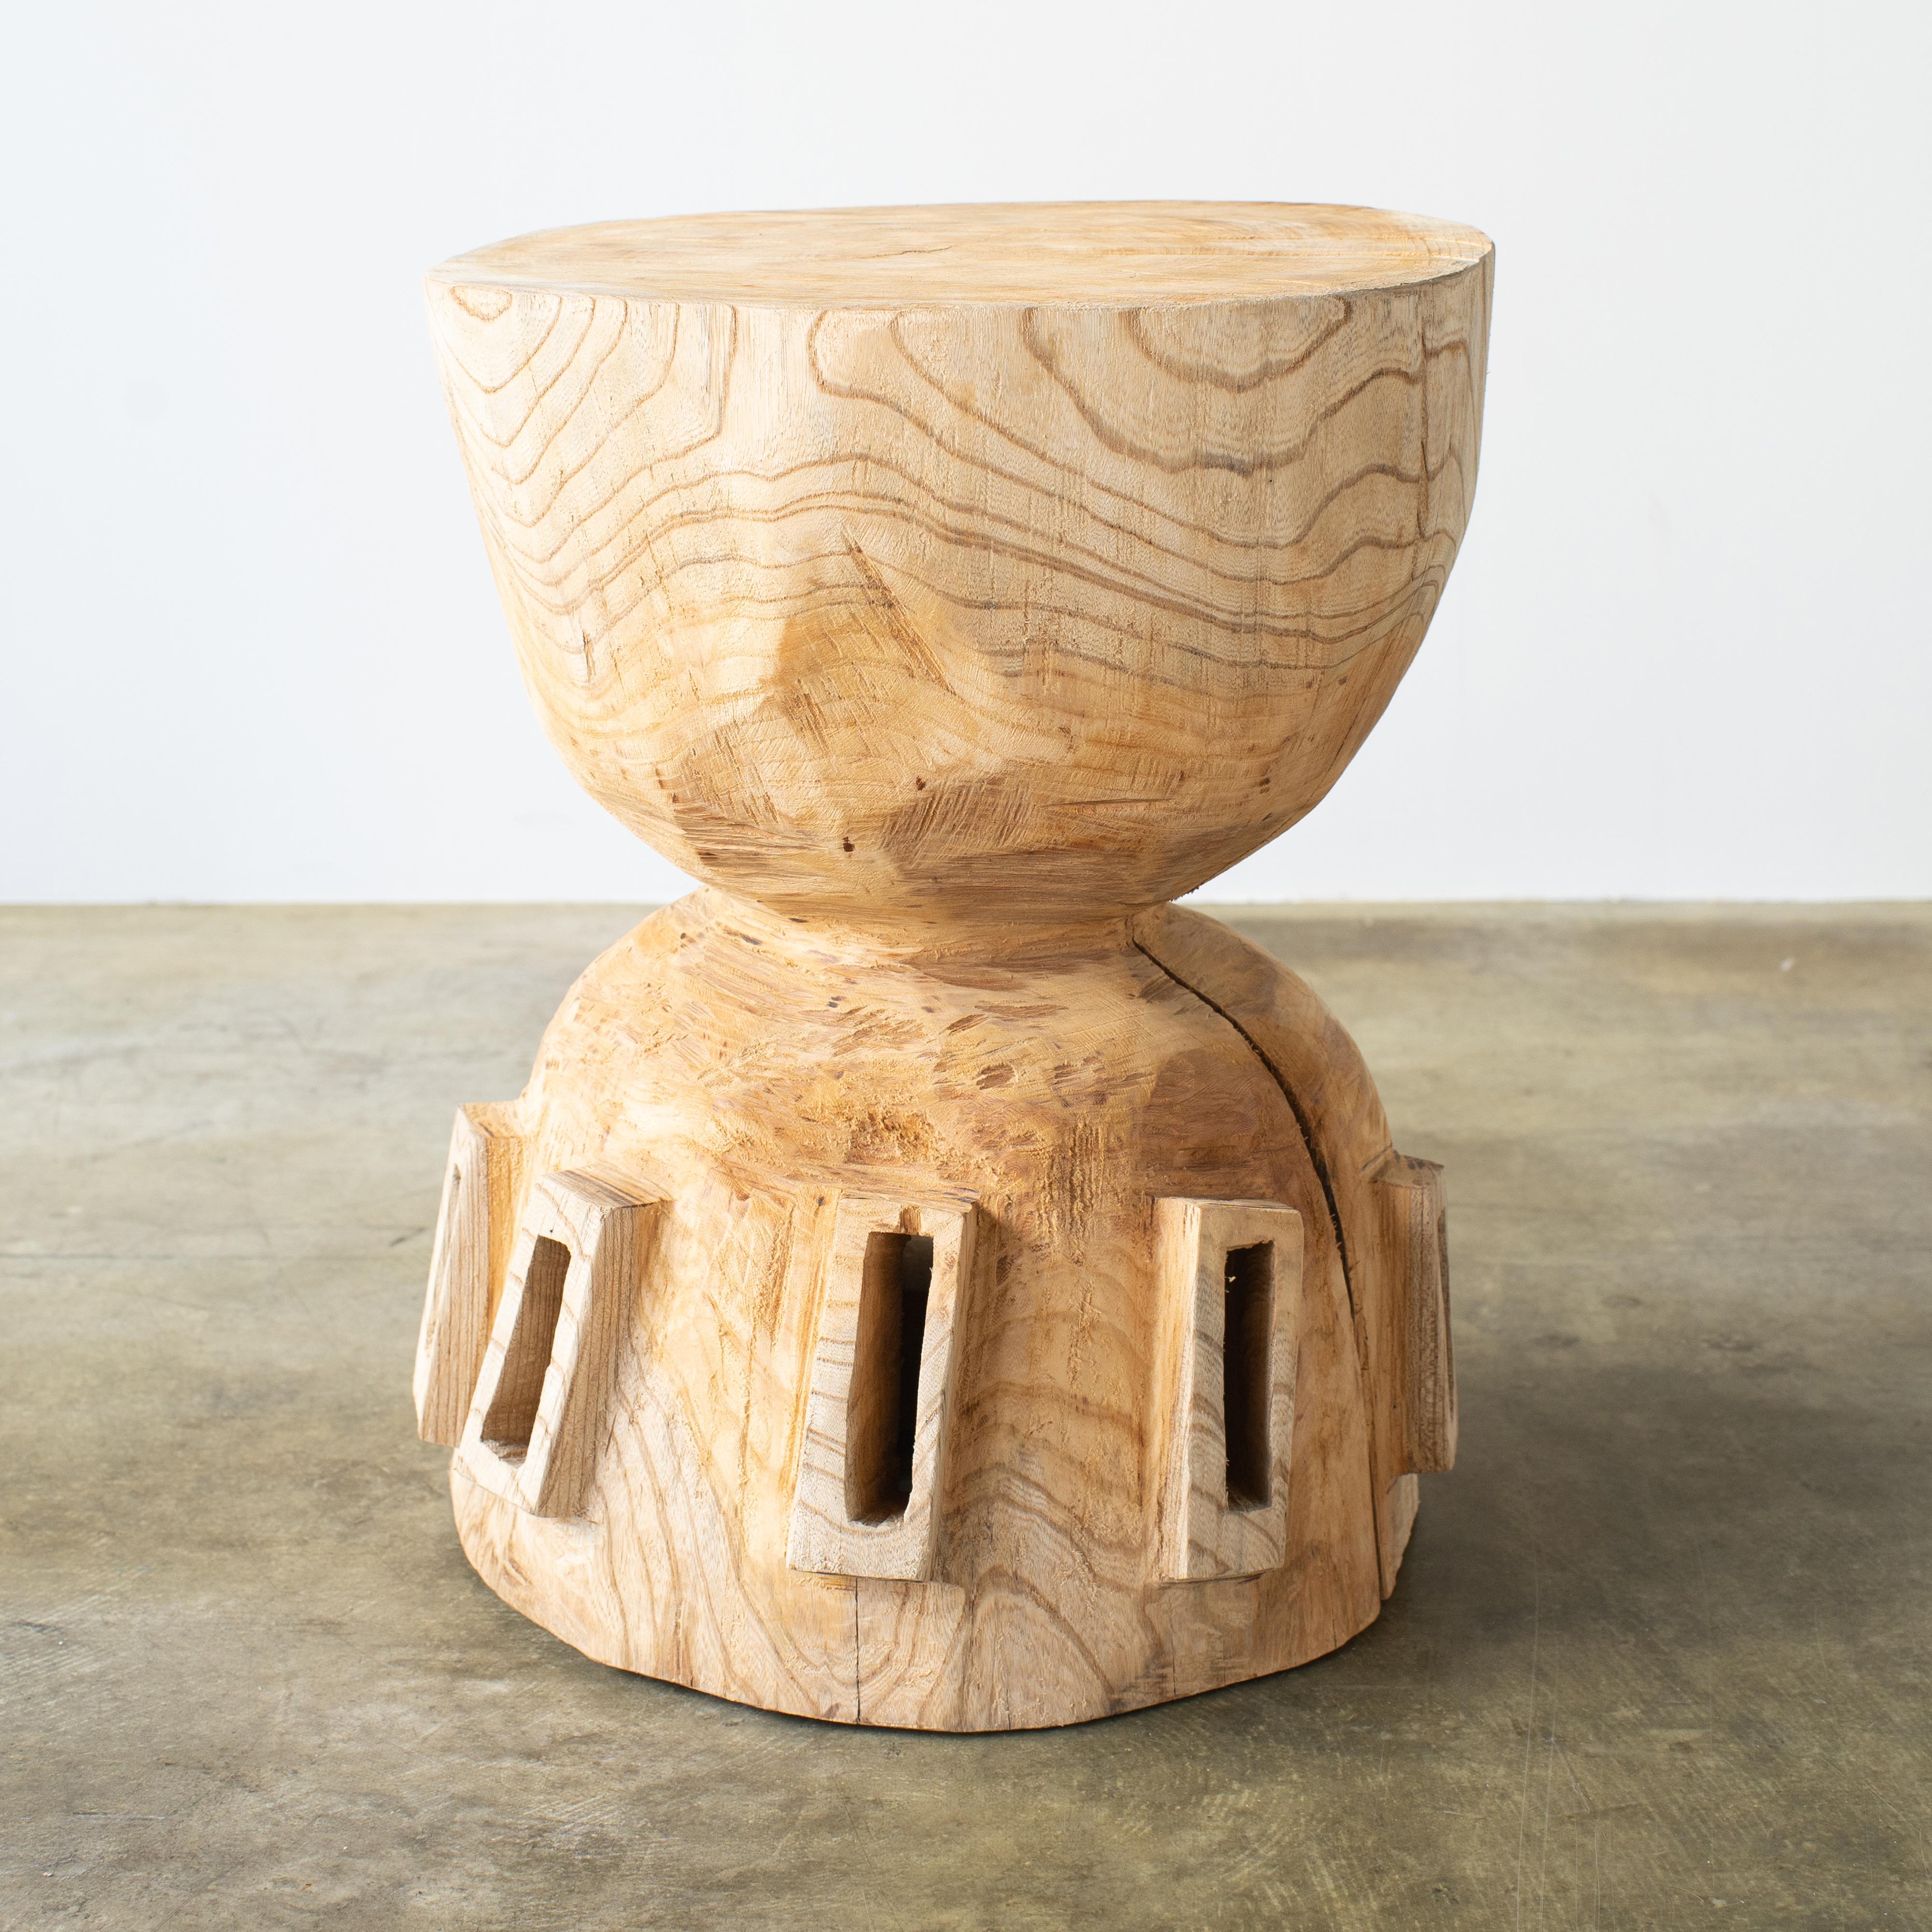 Name: Spaceship
Sculptural stool by Hiroyuki Nishimura and zone carved furniture
Material: zelkova
This work is carved from log with some kinds of chainsaws.
Most of wood used for Nishimura's works are unable to use anything, these woods are